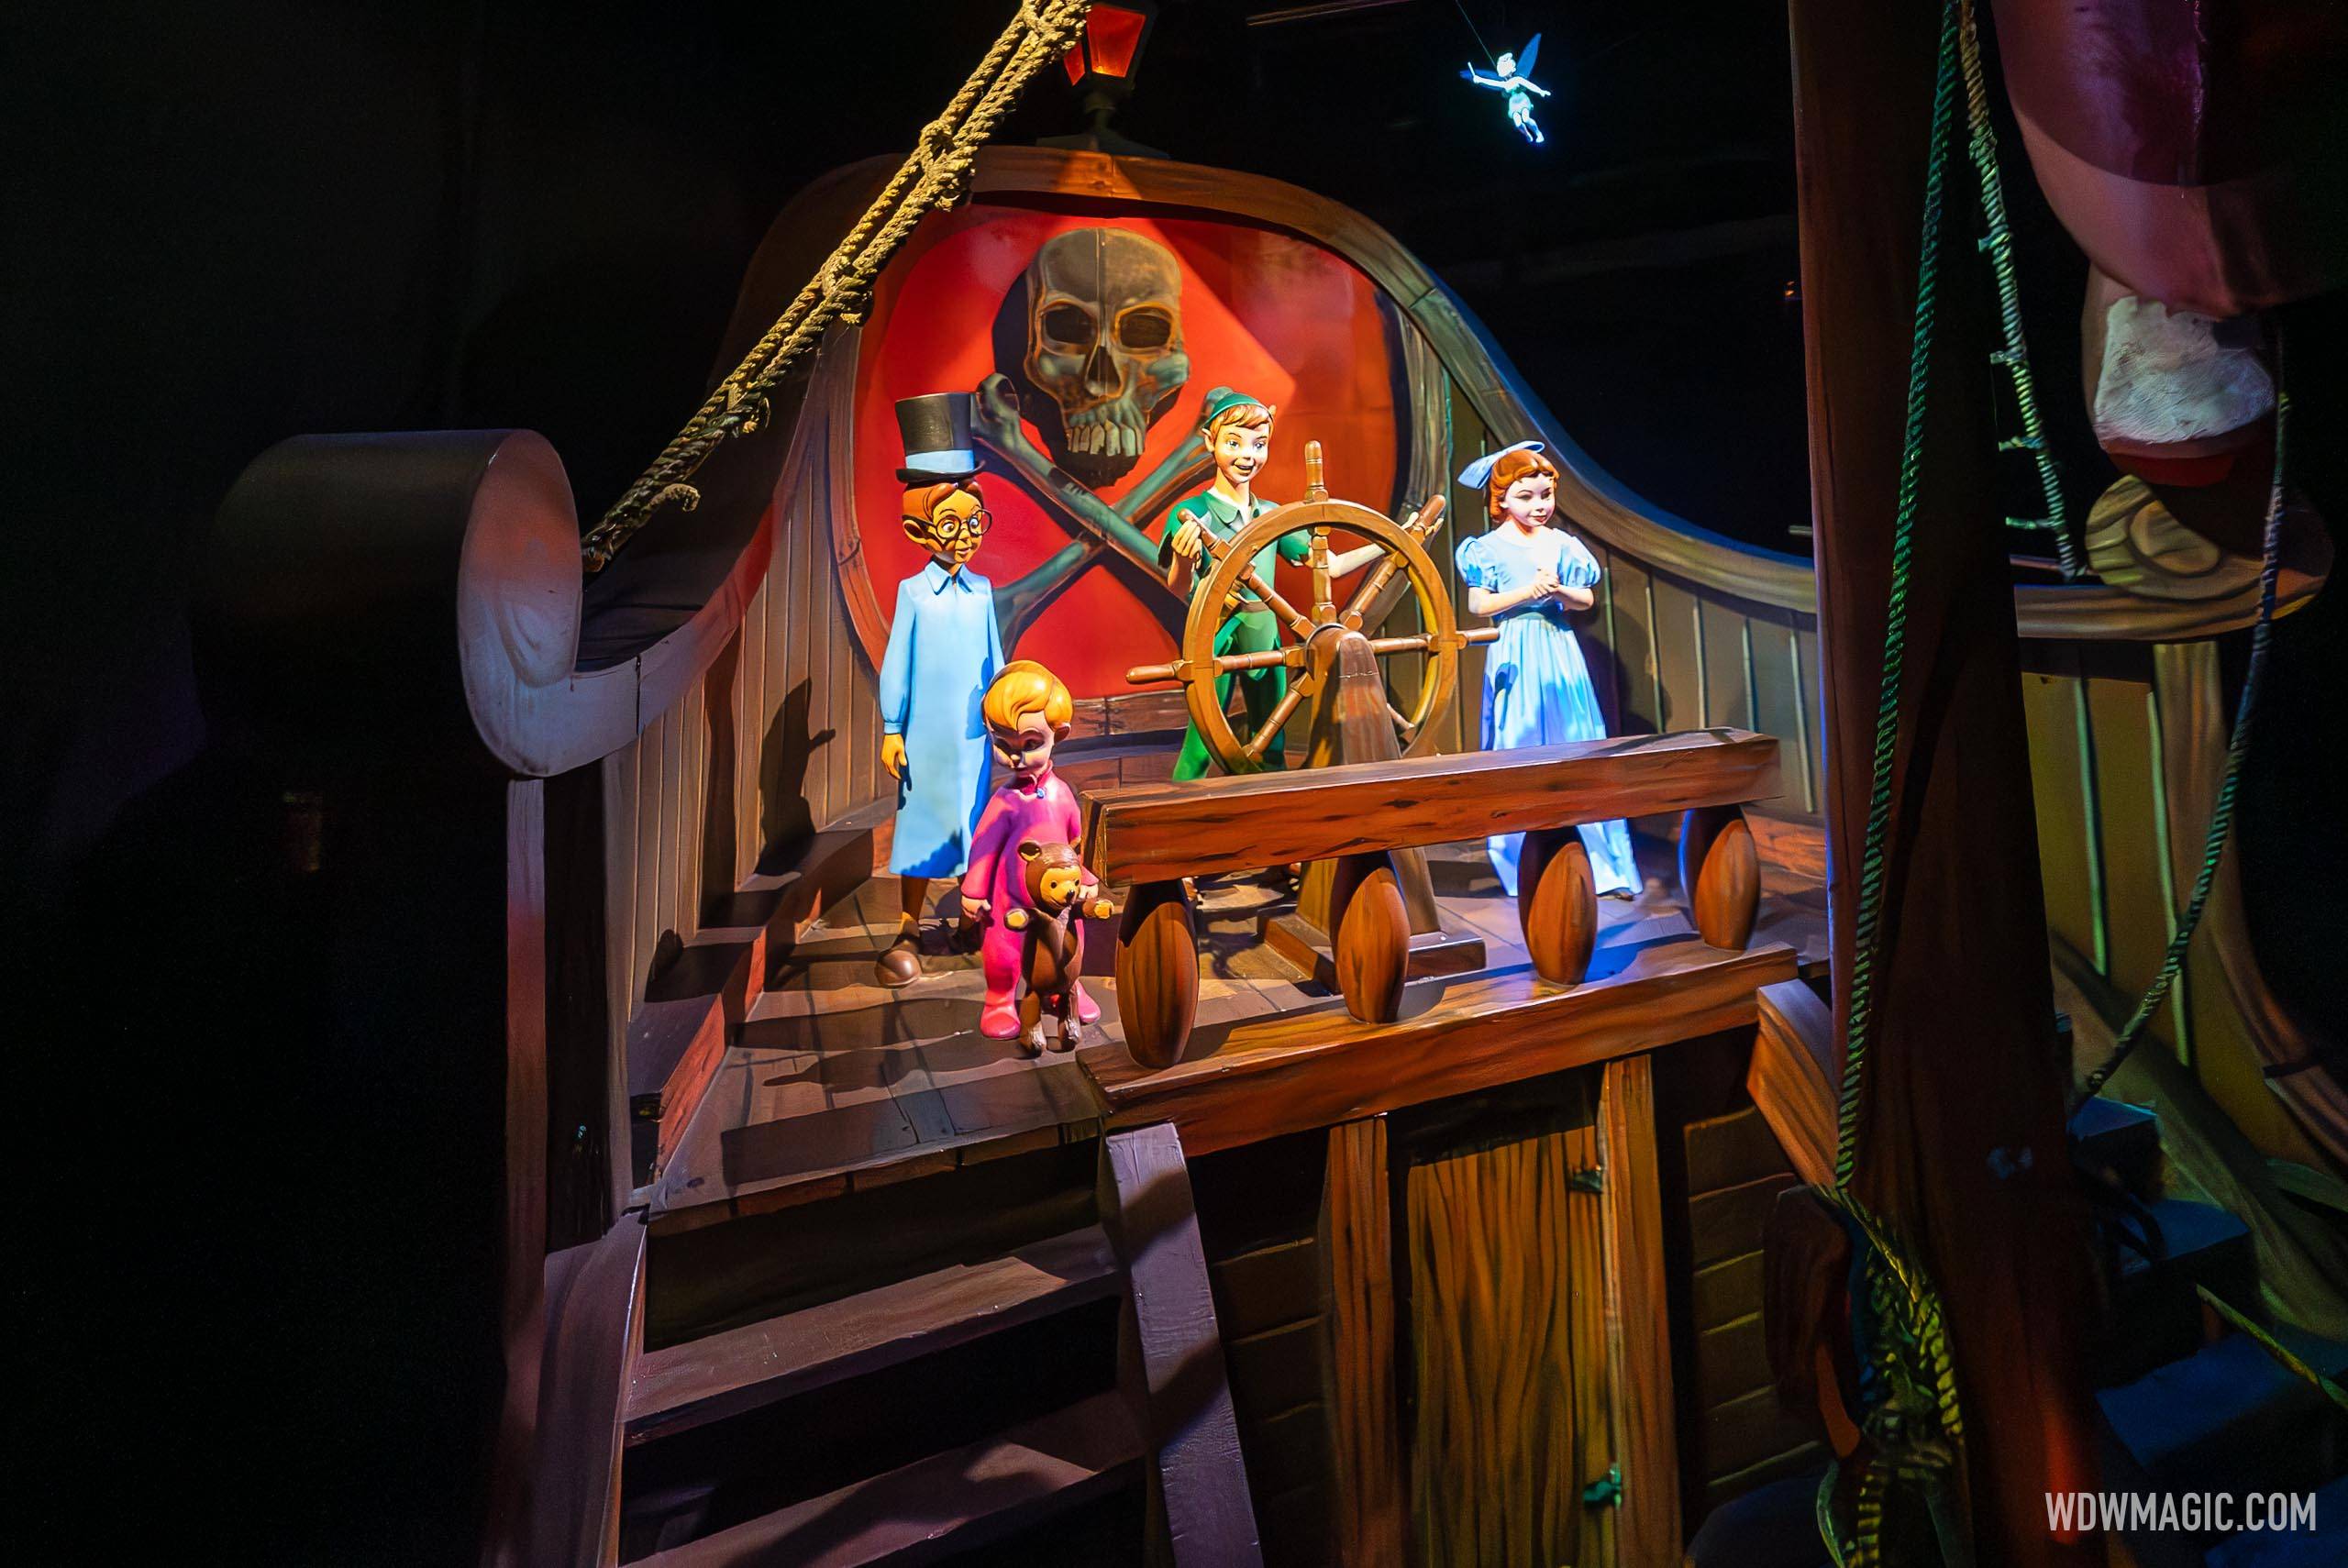 Peter Pan's Flight at Walt Disney World Now Closed For Updates